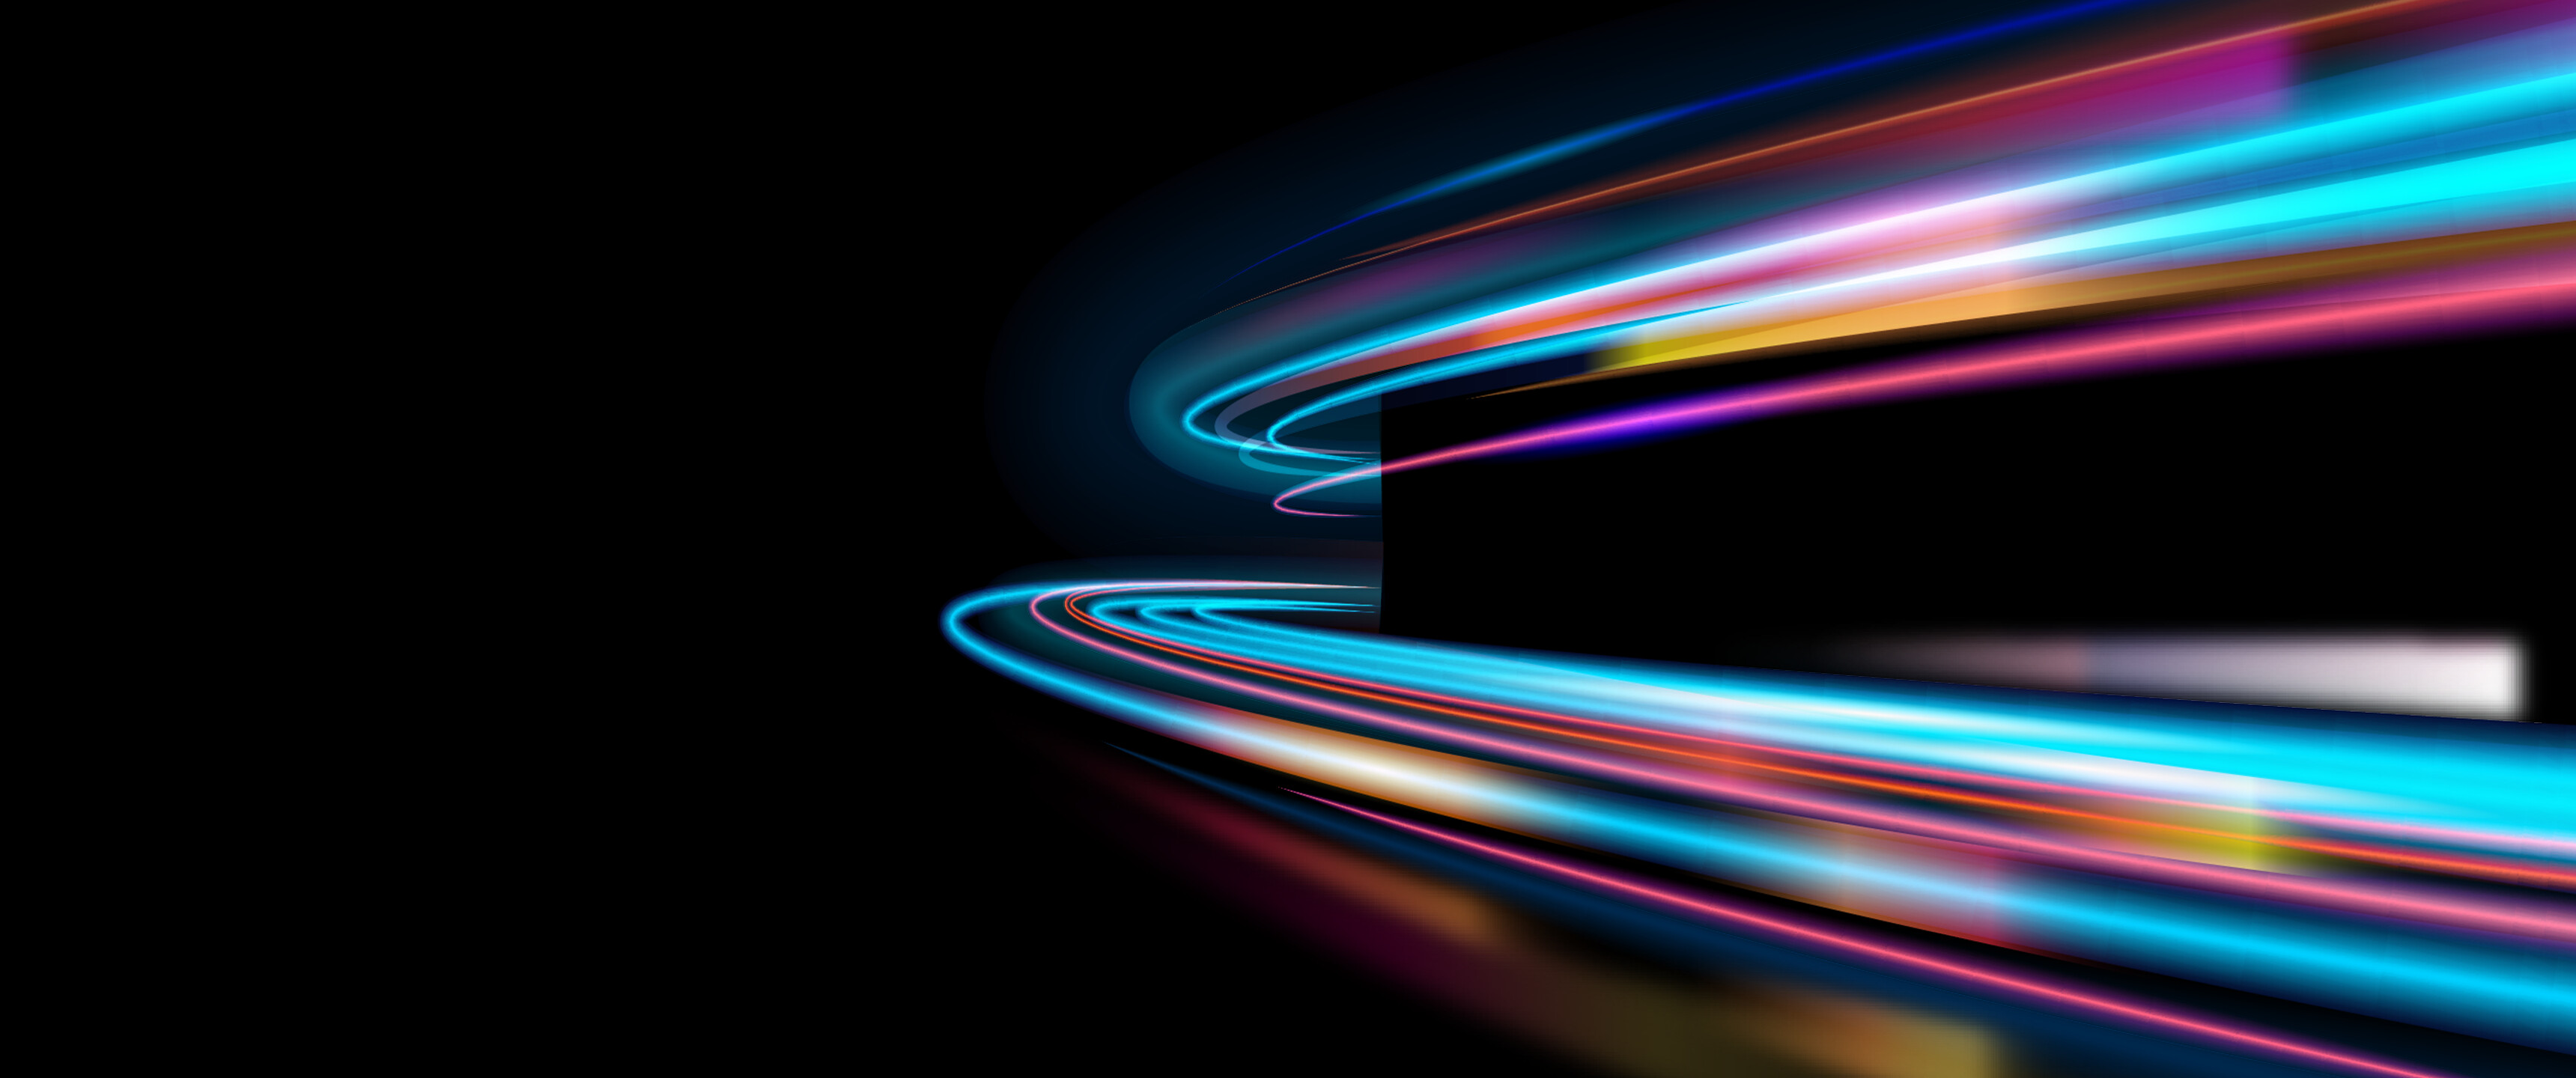 Neon: Vibrant colors create an ethereal, dreamy feel. 3440x1440 Dual Screen Background.